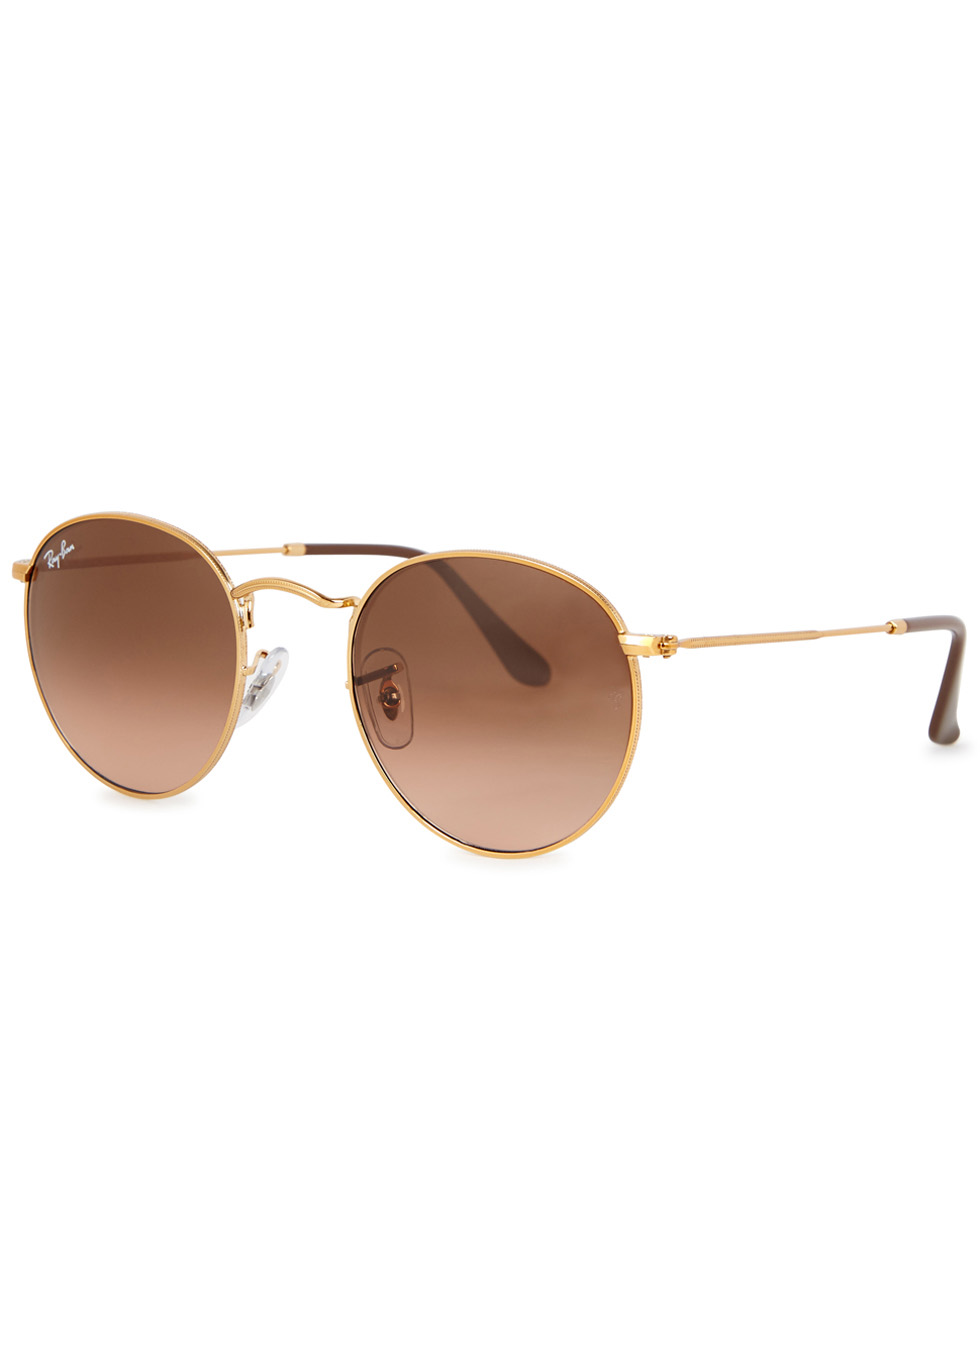 ray ban curved sunglasses